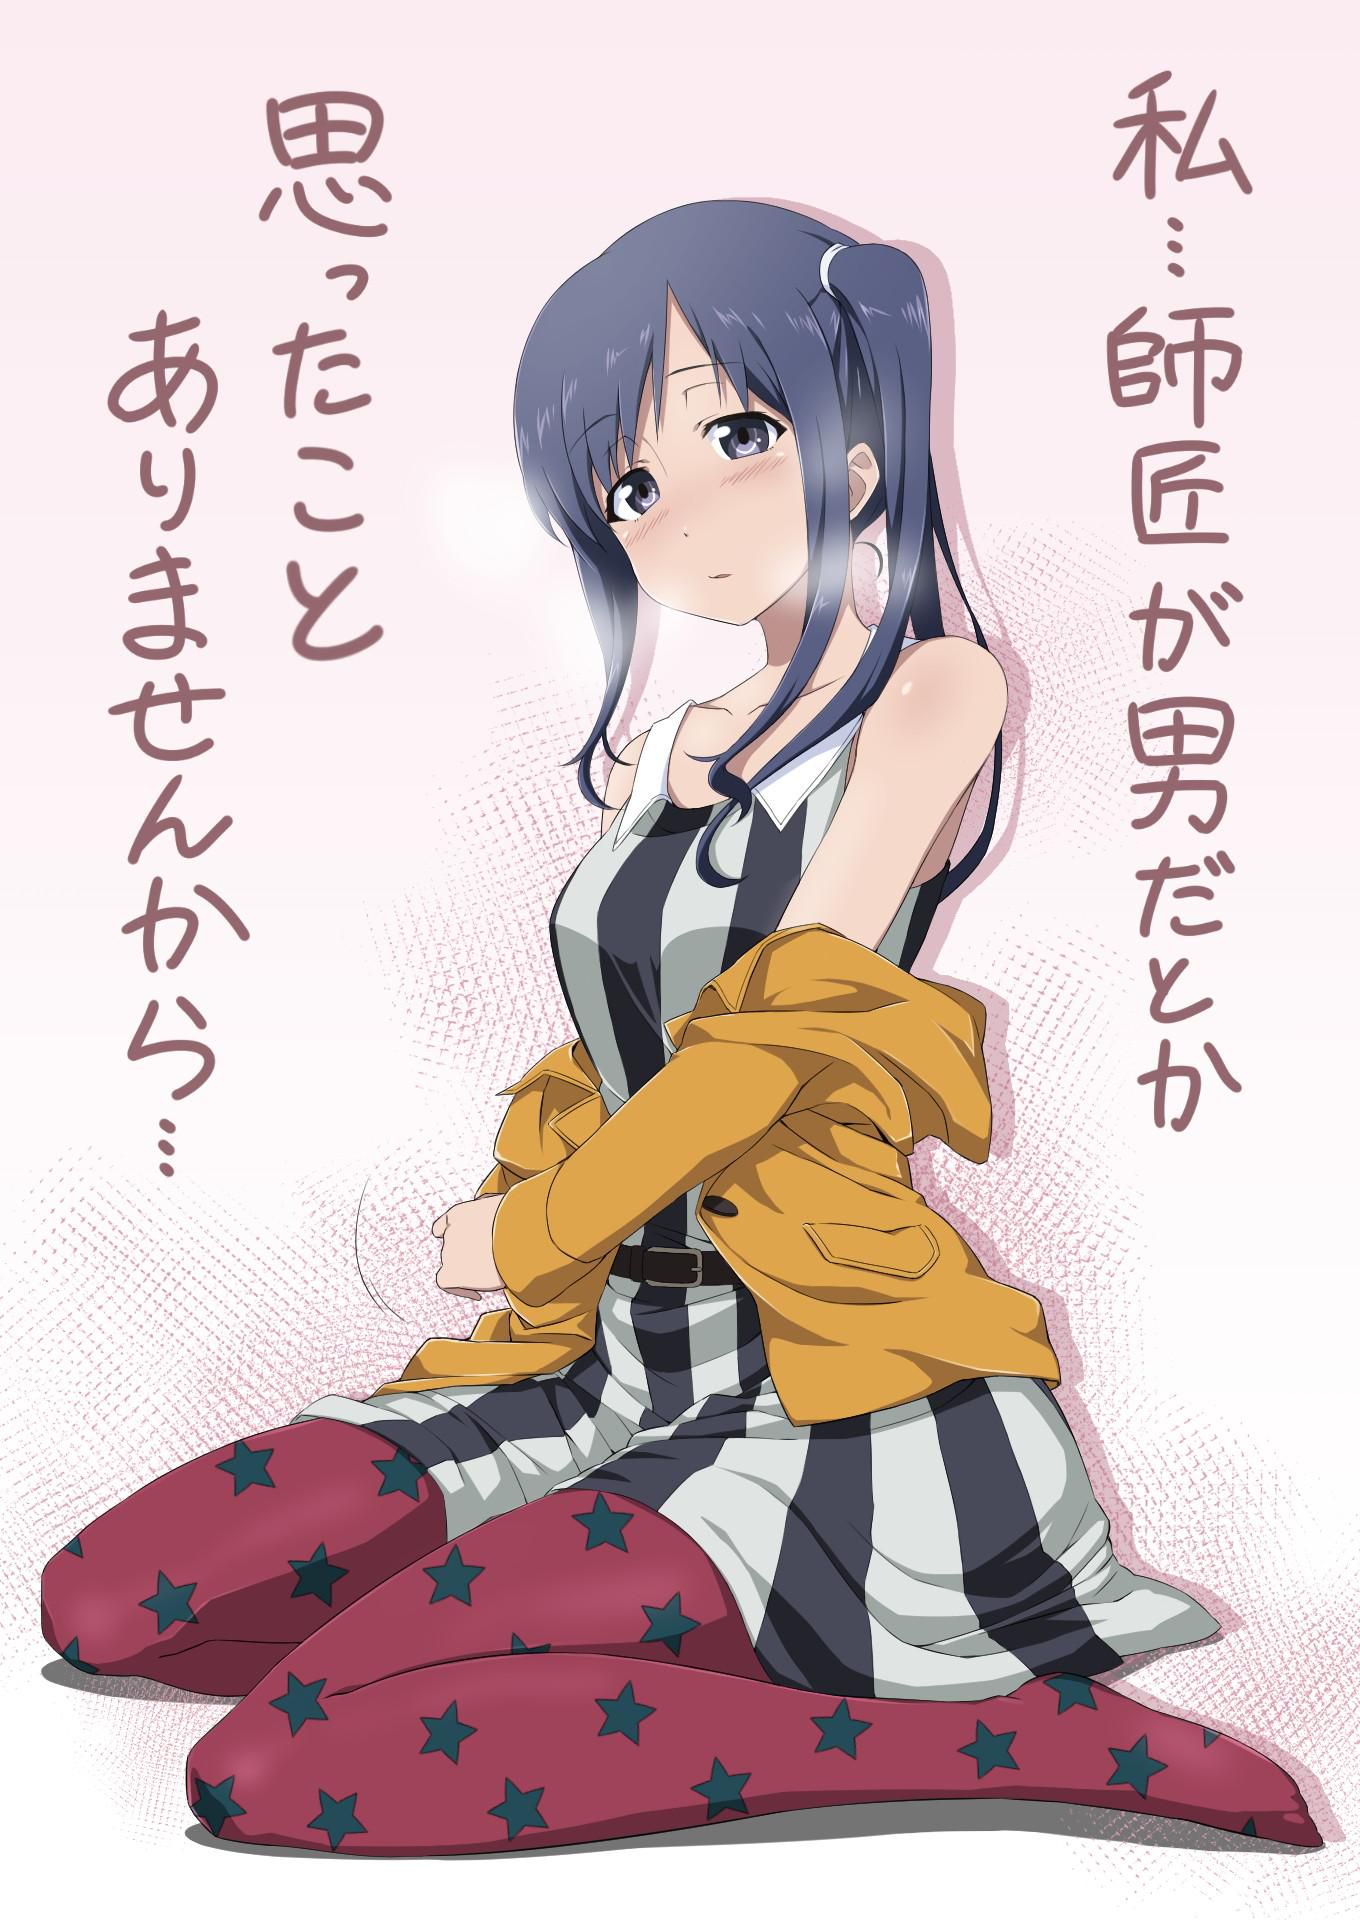 [SHIROBAKO] erotic image summary that makes you want to go to the two-dimensional world and want to go to Imai Midori and mecha Hamehame 7